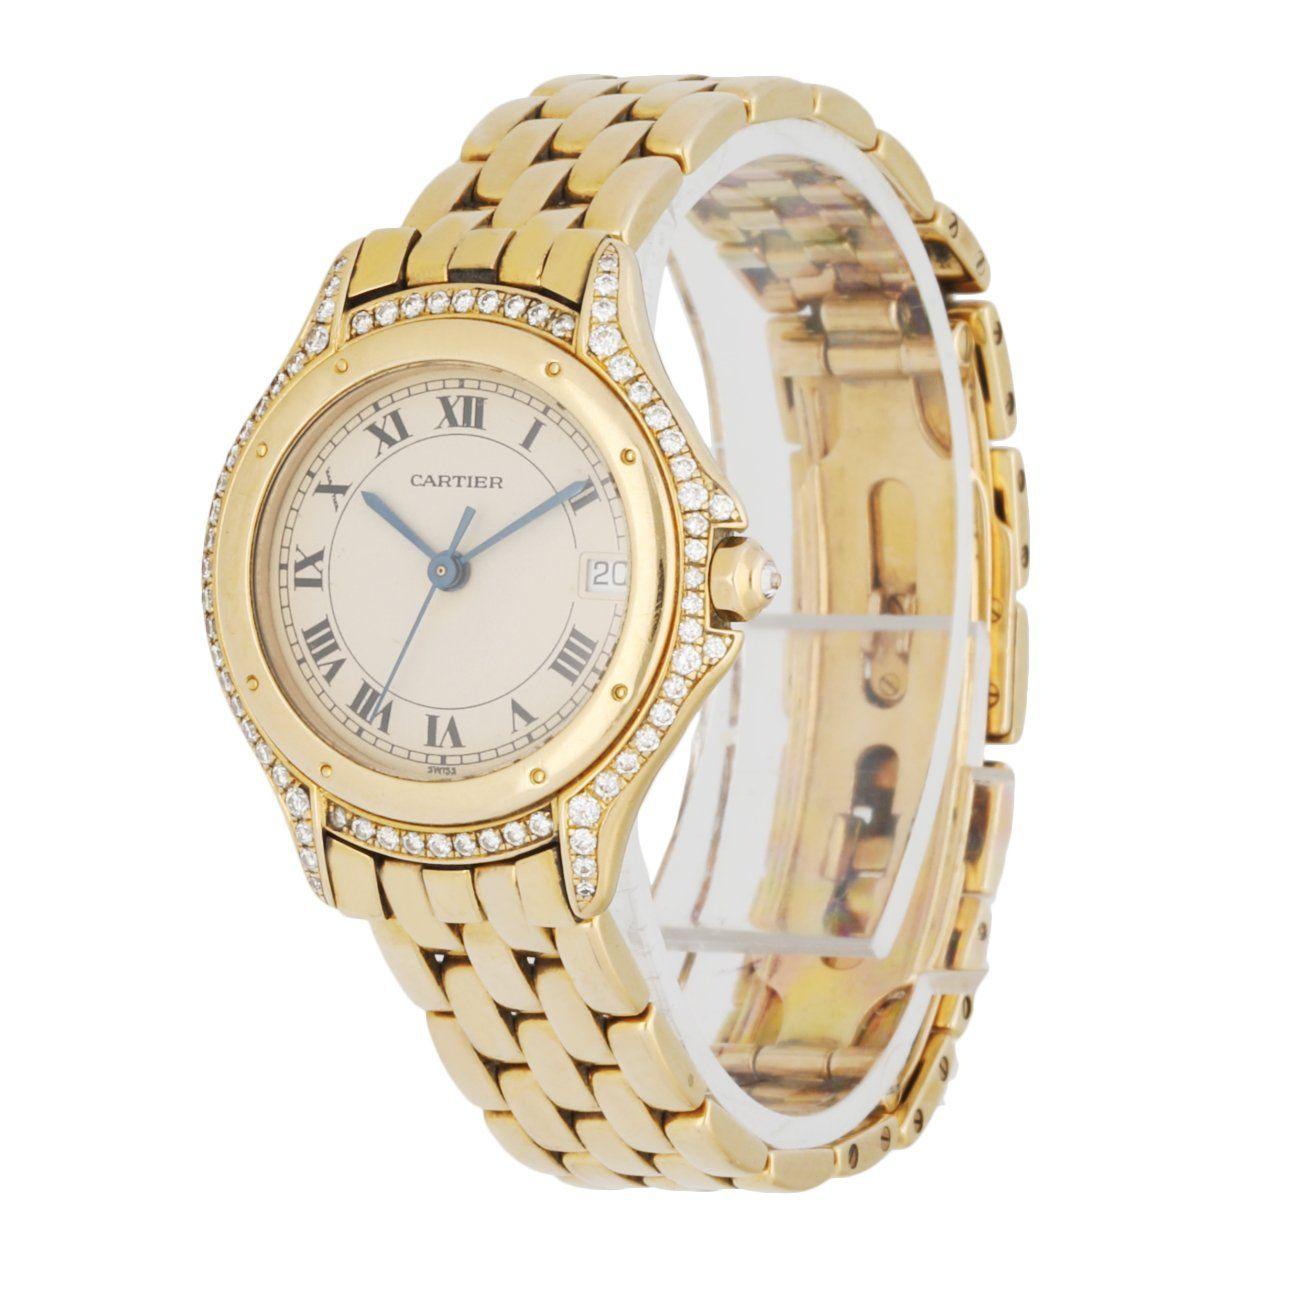 Cartier Panthere Cougar 887907 ladies watch. 26mm 18k yellow gold case with factory set diamonds. 18K yellow gold bezel.Â Cream dial with blue hands and black Roman numeral hour marker. Date display at 3 o'clock position. 18k yellow gold bracelet